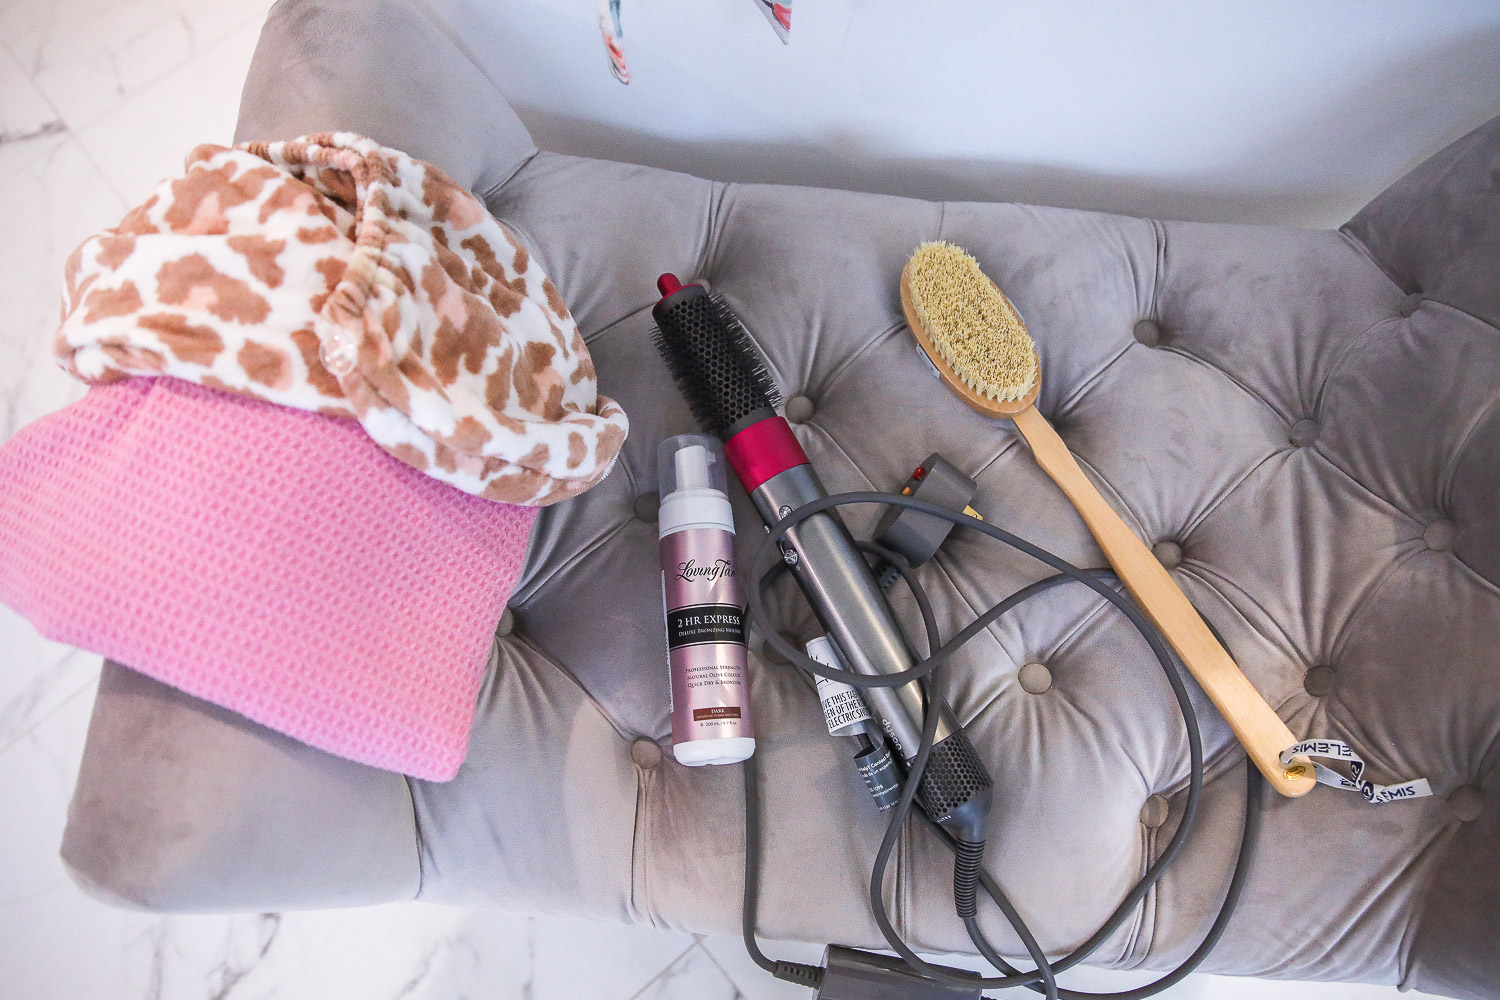 dyson airwrap review, master bathroom white and gold, Emily Gemma | Nighttime Routine by popular US beauty blog, The Sweetest Thing: image of a leopard print body towel, Elemis body exfoliating body brush, and pink textured towel on a grey velvet tuft bench. 